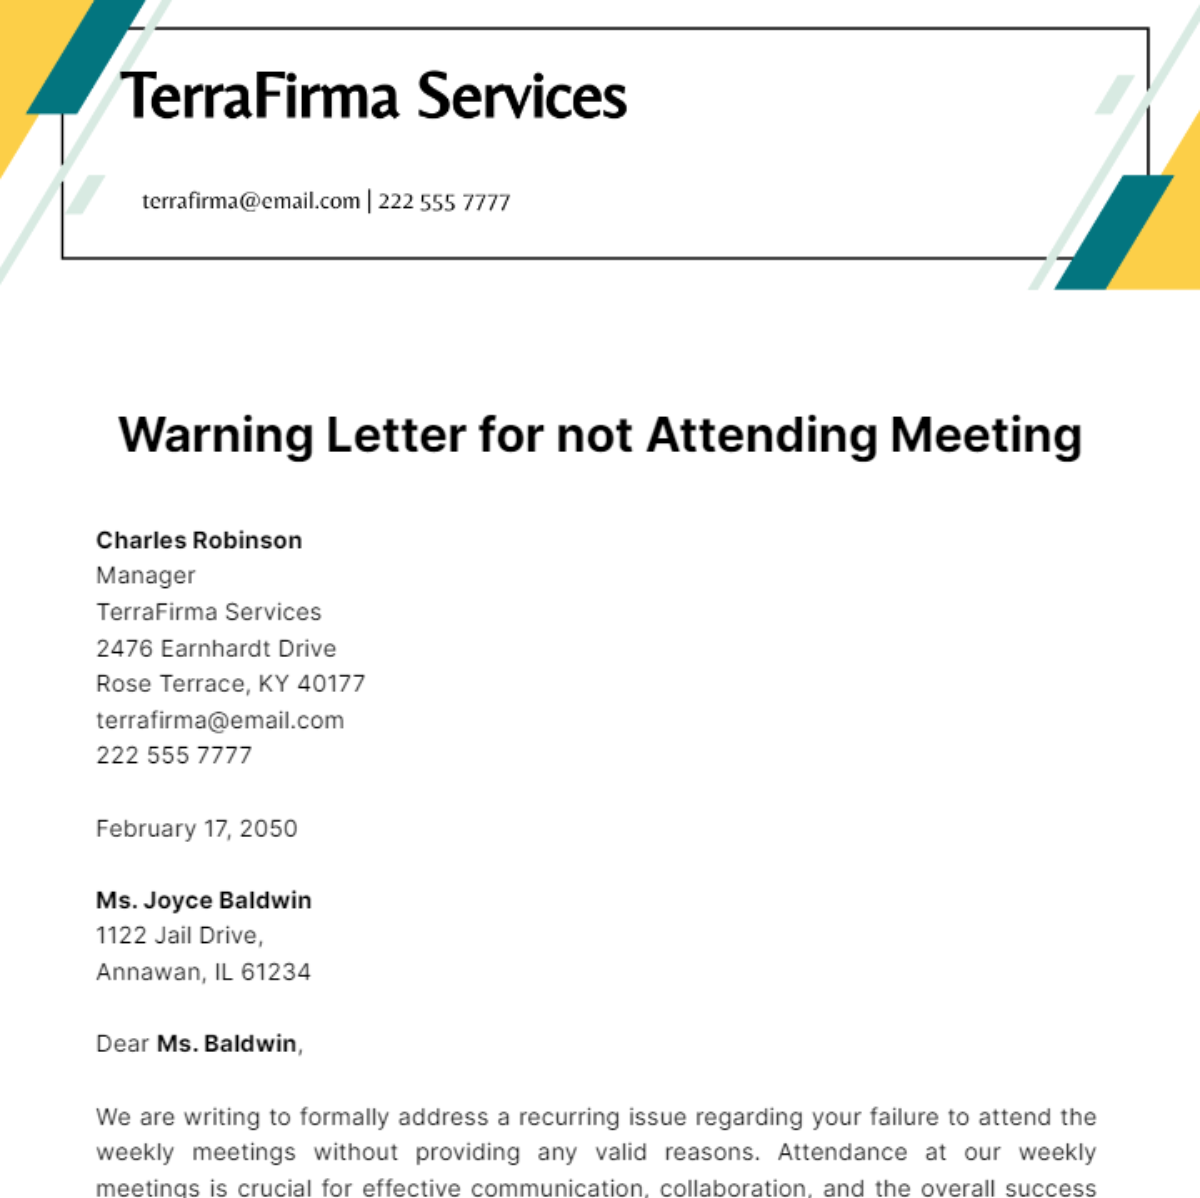 Warning Letter for not Attending Meeting Template